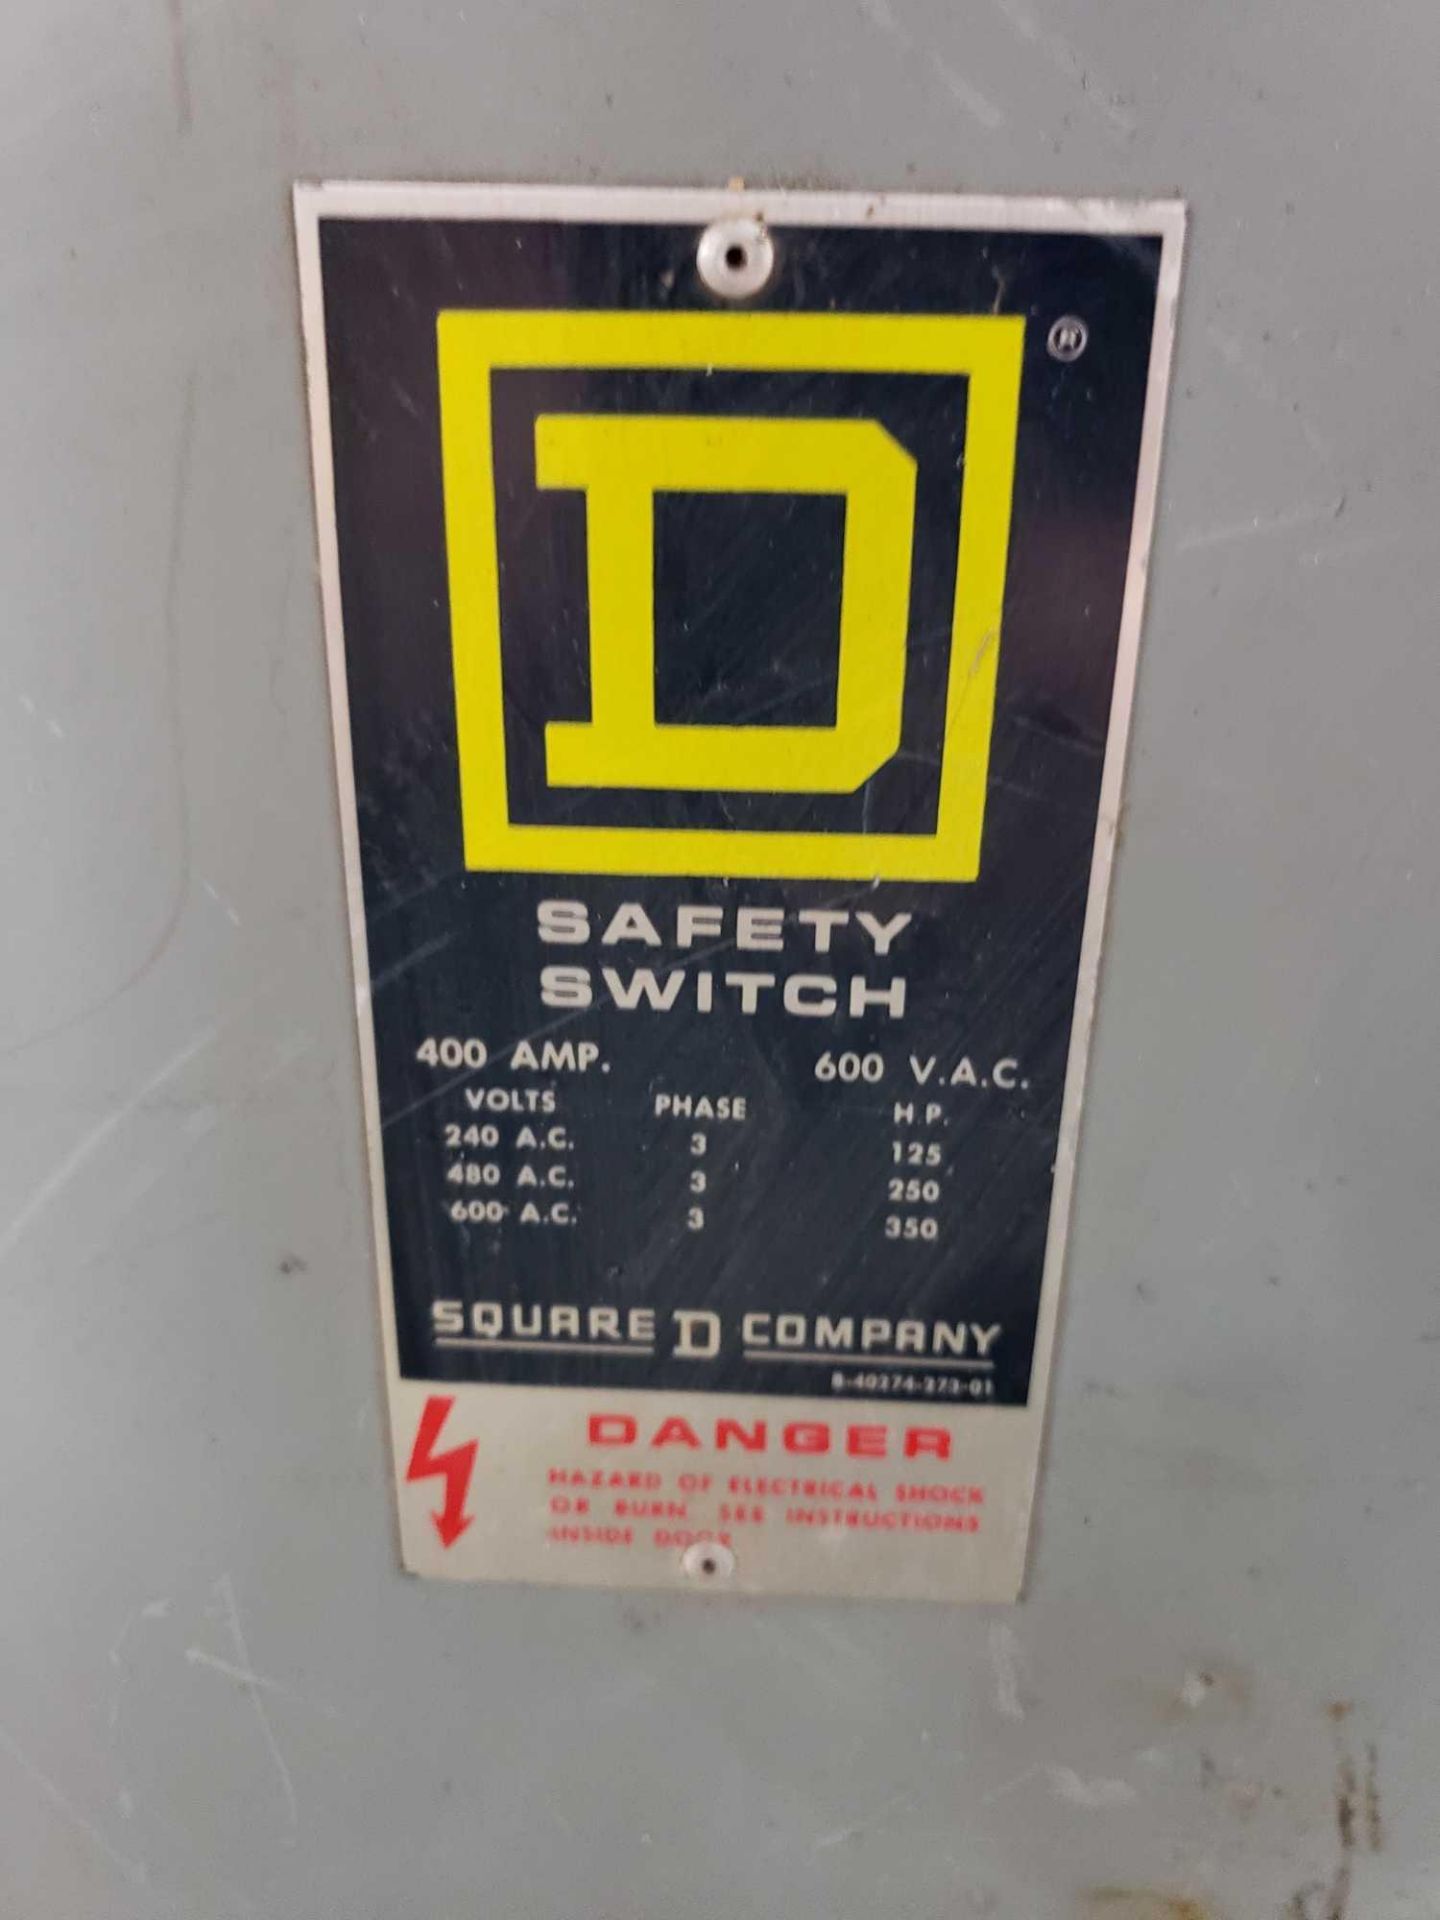 Square D catalog number HU365 safety switch. 400amp, 600vac. - Image 2 of 6